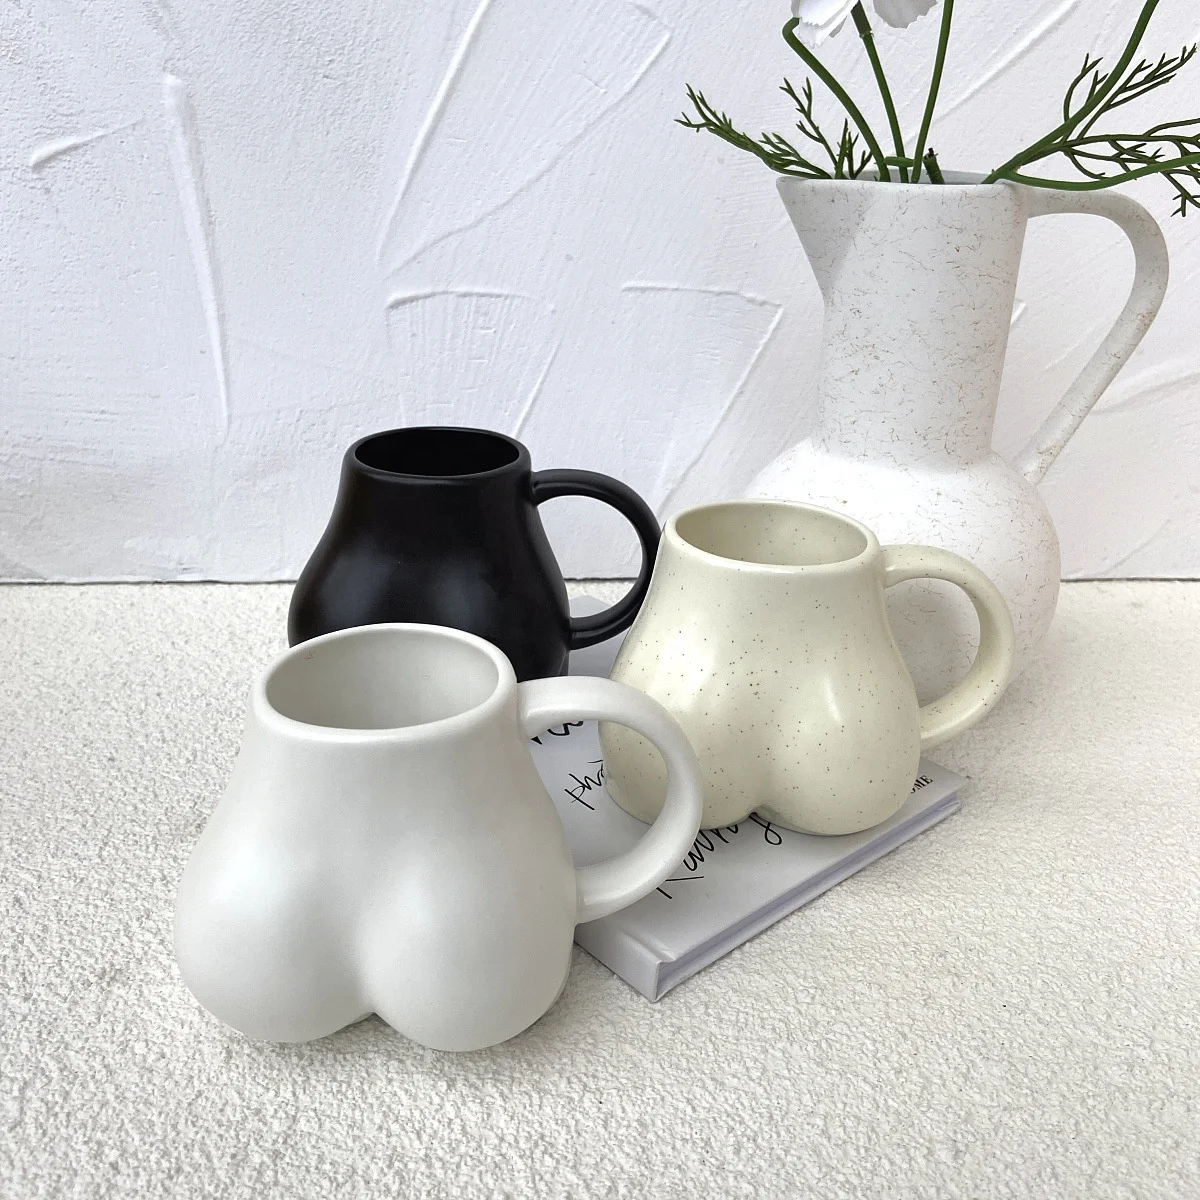 

Creative Ceramics Woman Body Coffee Milk Mug Butt Sculpture Cup Living Room Dining Table Mugs Cup Home Decoration Accessories, Black , white,cream